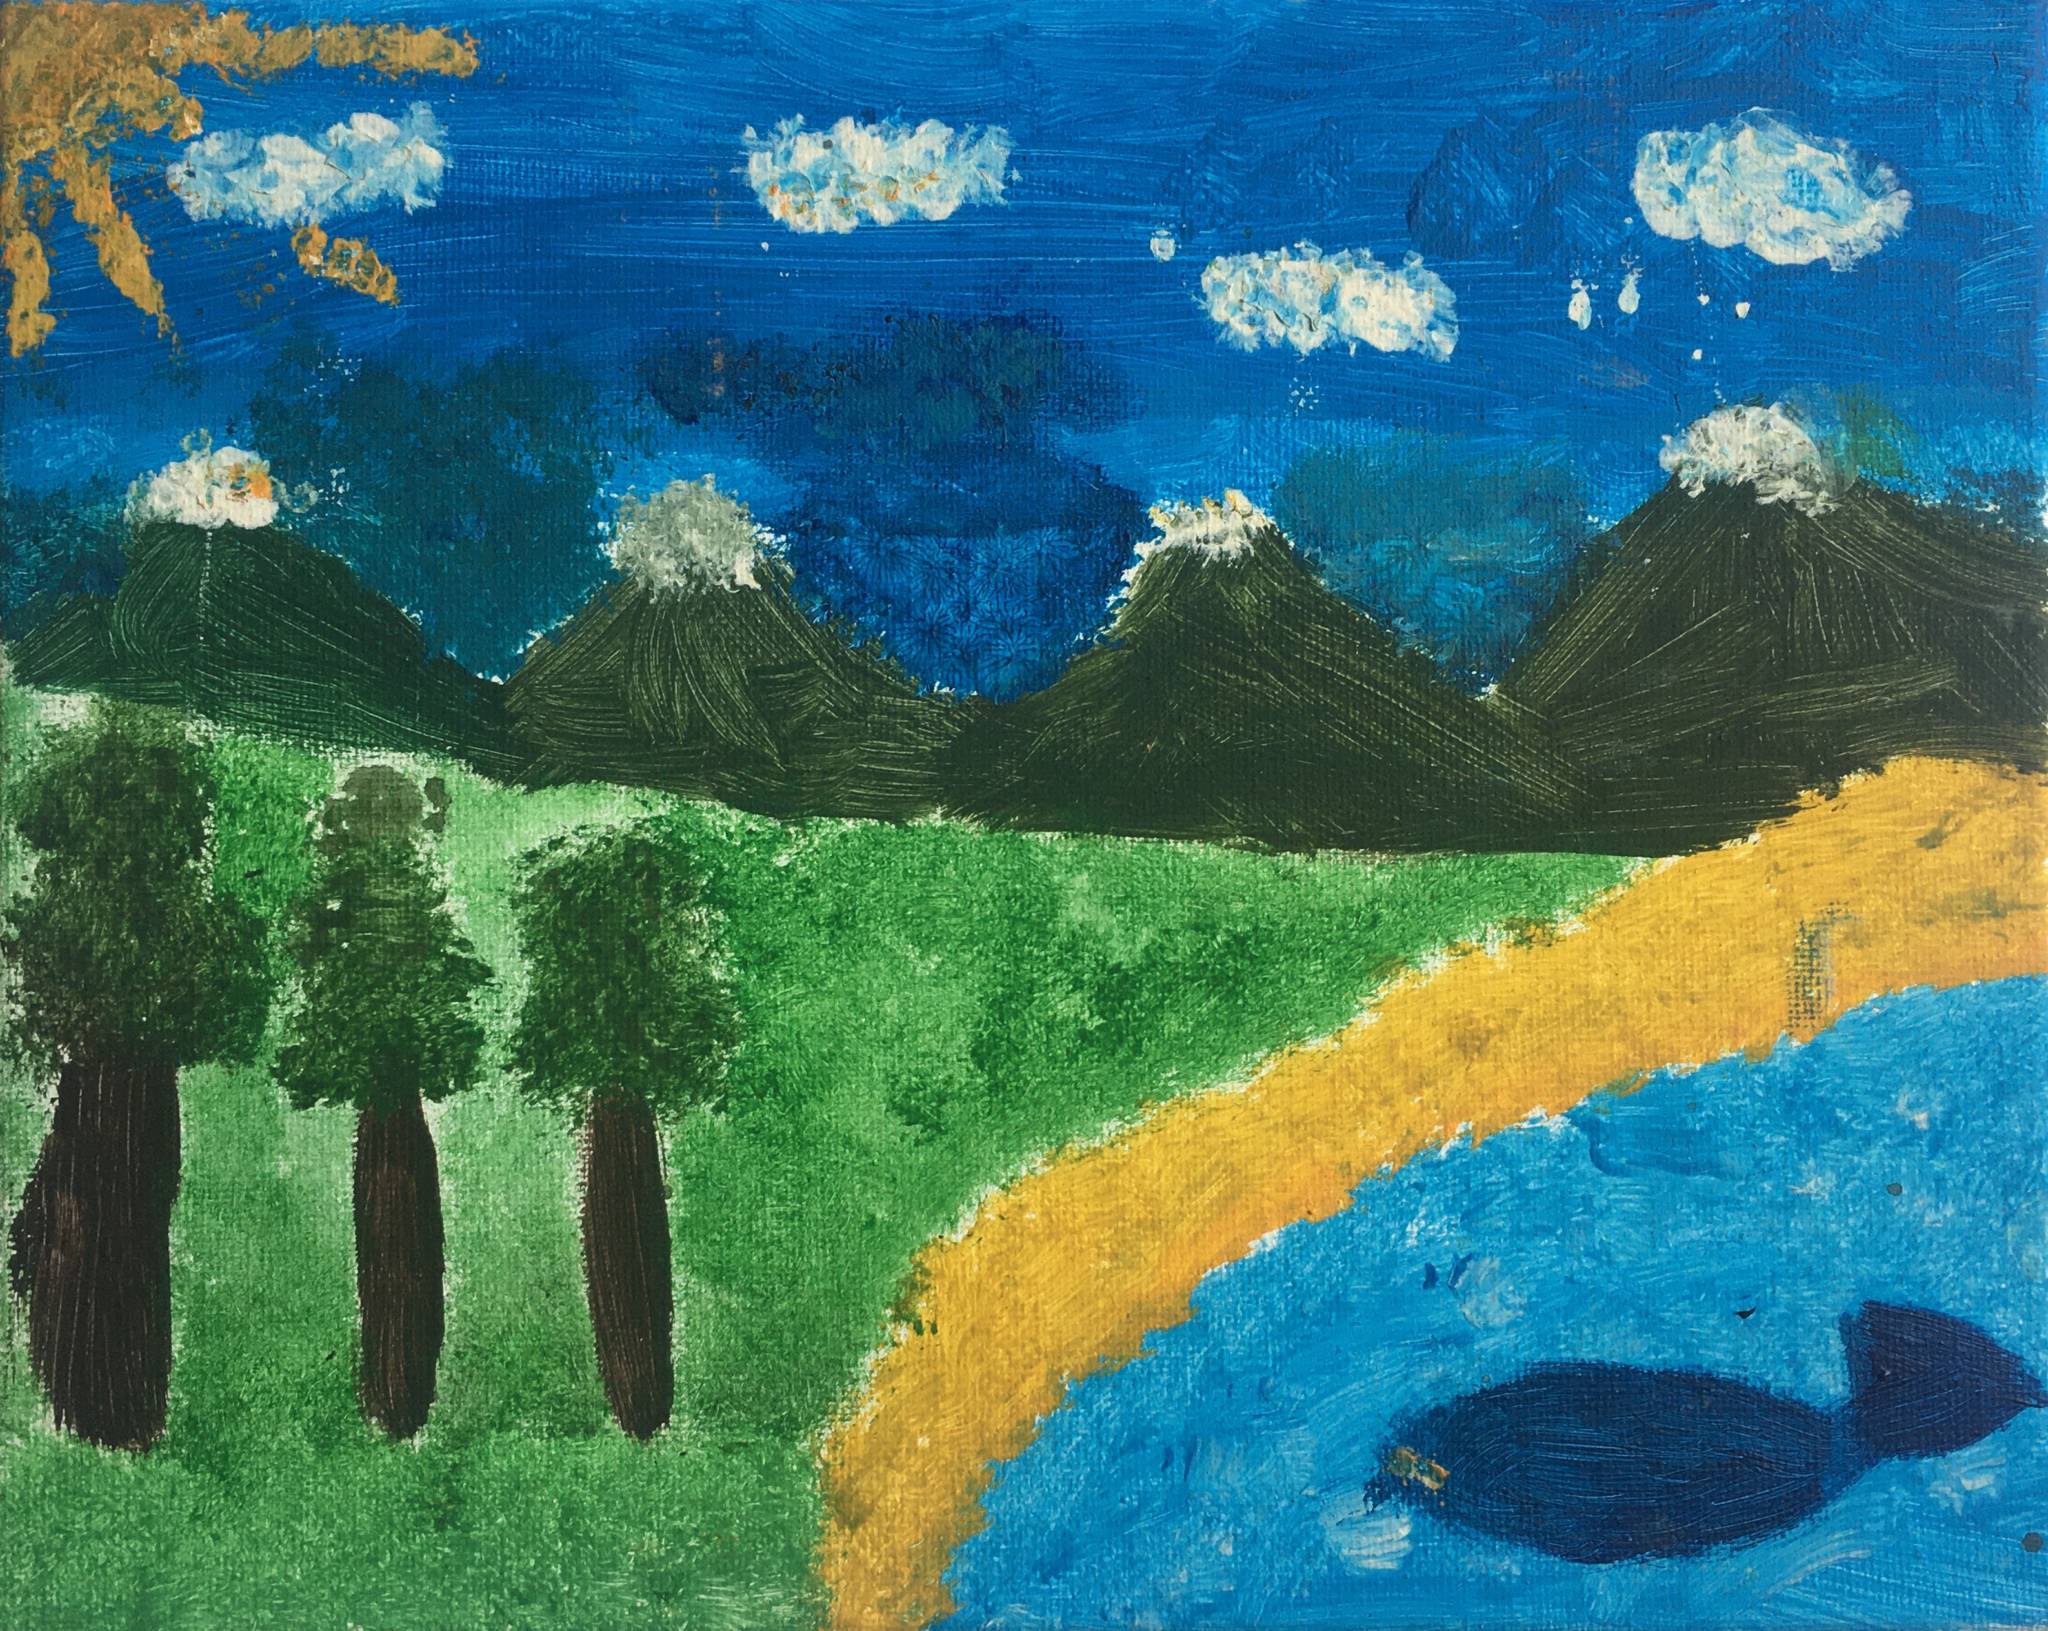 A landscape painting with a blue sea, a whale, yellow sand, green grass and three trees, four mountains sit in the background with a blue sky and white clouds